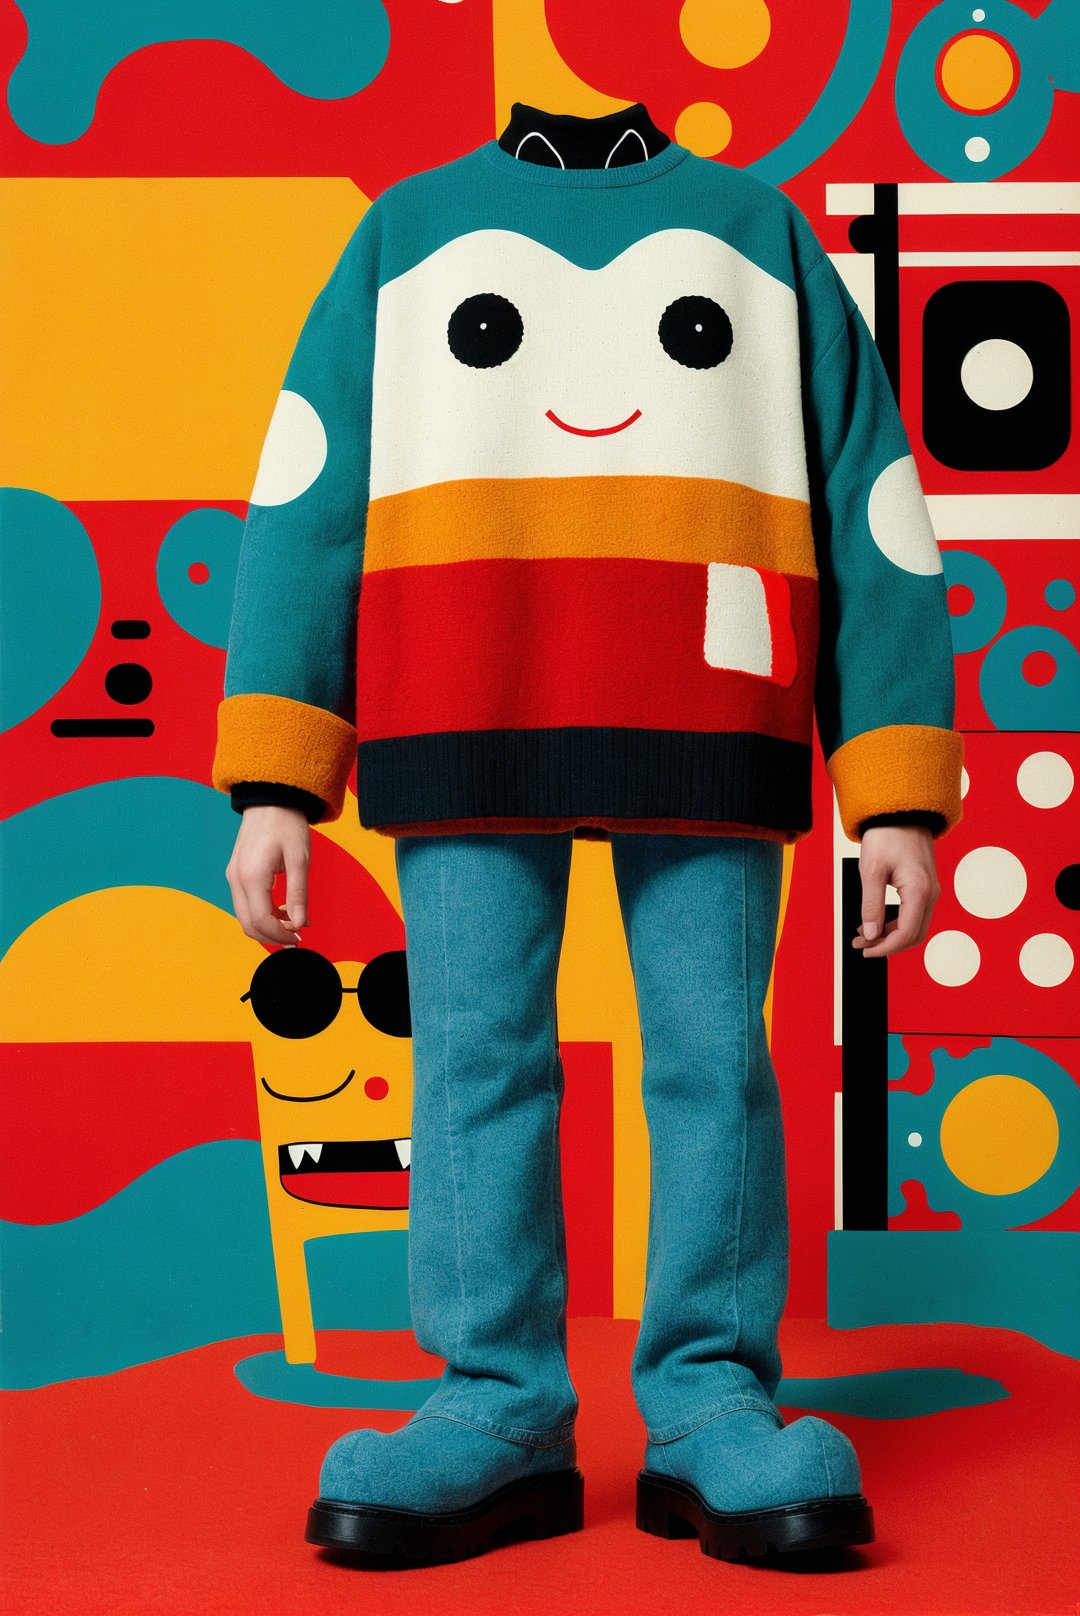 Digital painting, Unreal Engine, Frantic (Laboratory:1.1) , it is made by Levi's, it is made from Wool, (pop art stylized by Jon Burgerman:1.0) , Detailed illustration, 70s Art, F/8